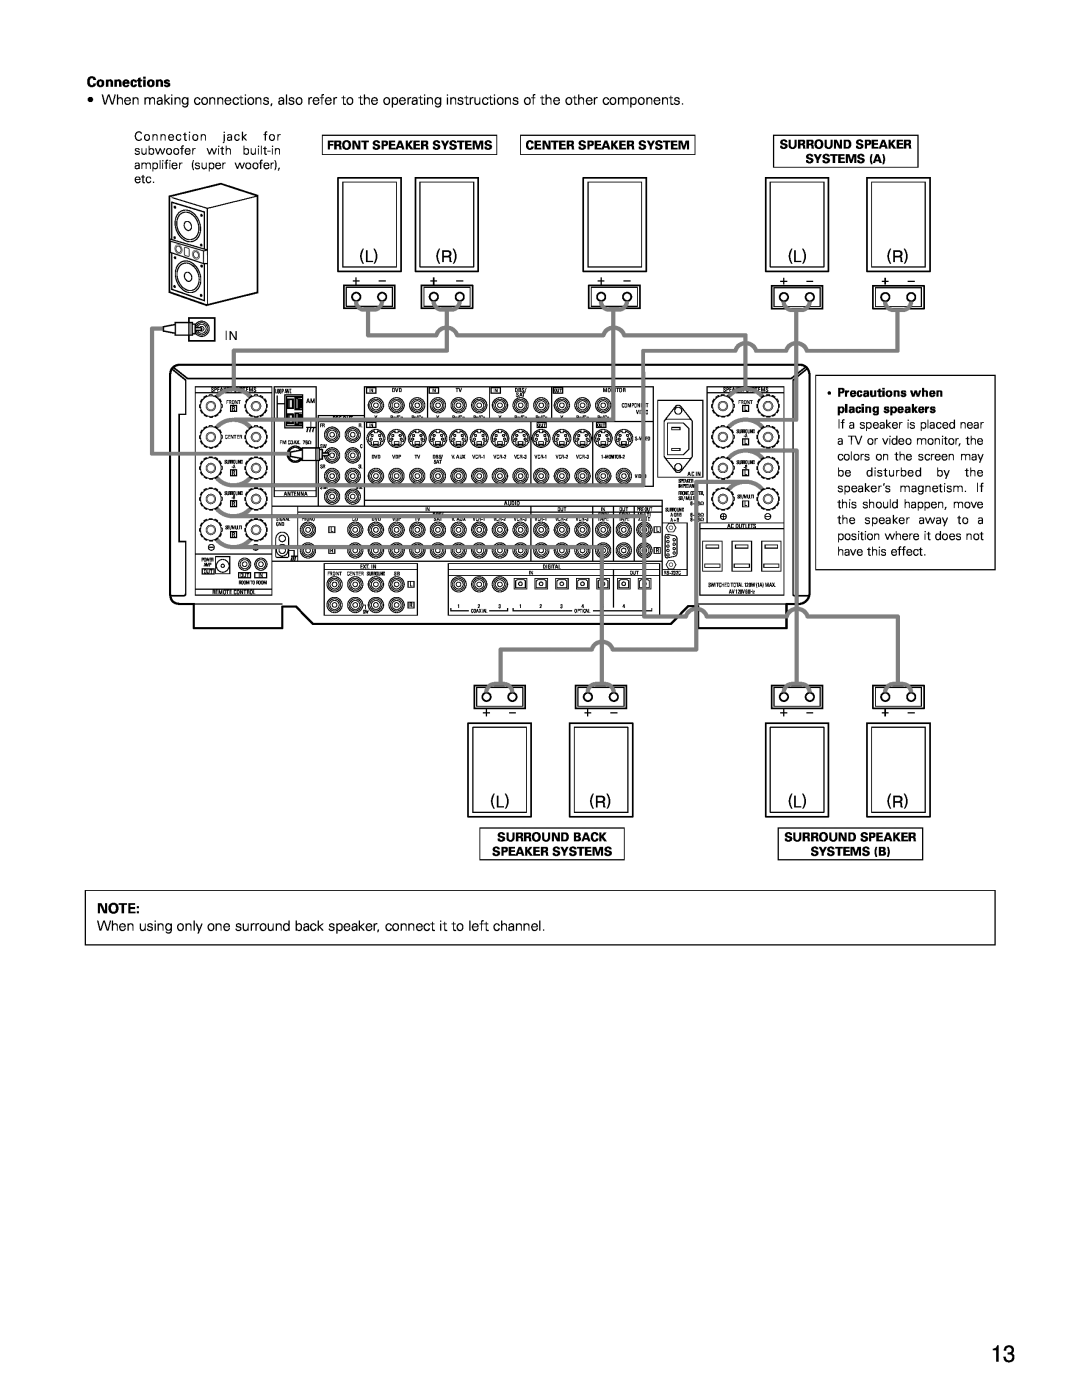 Denon AVR-4802 manual Connections 